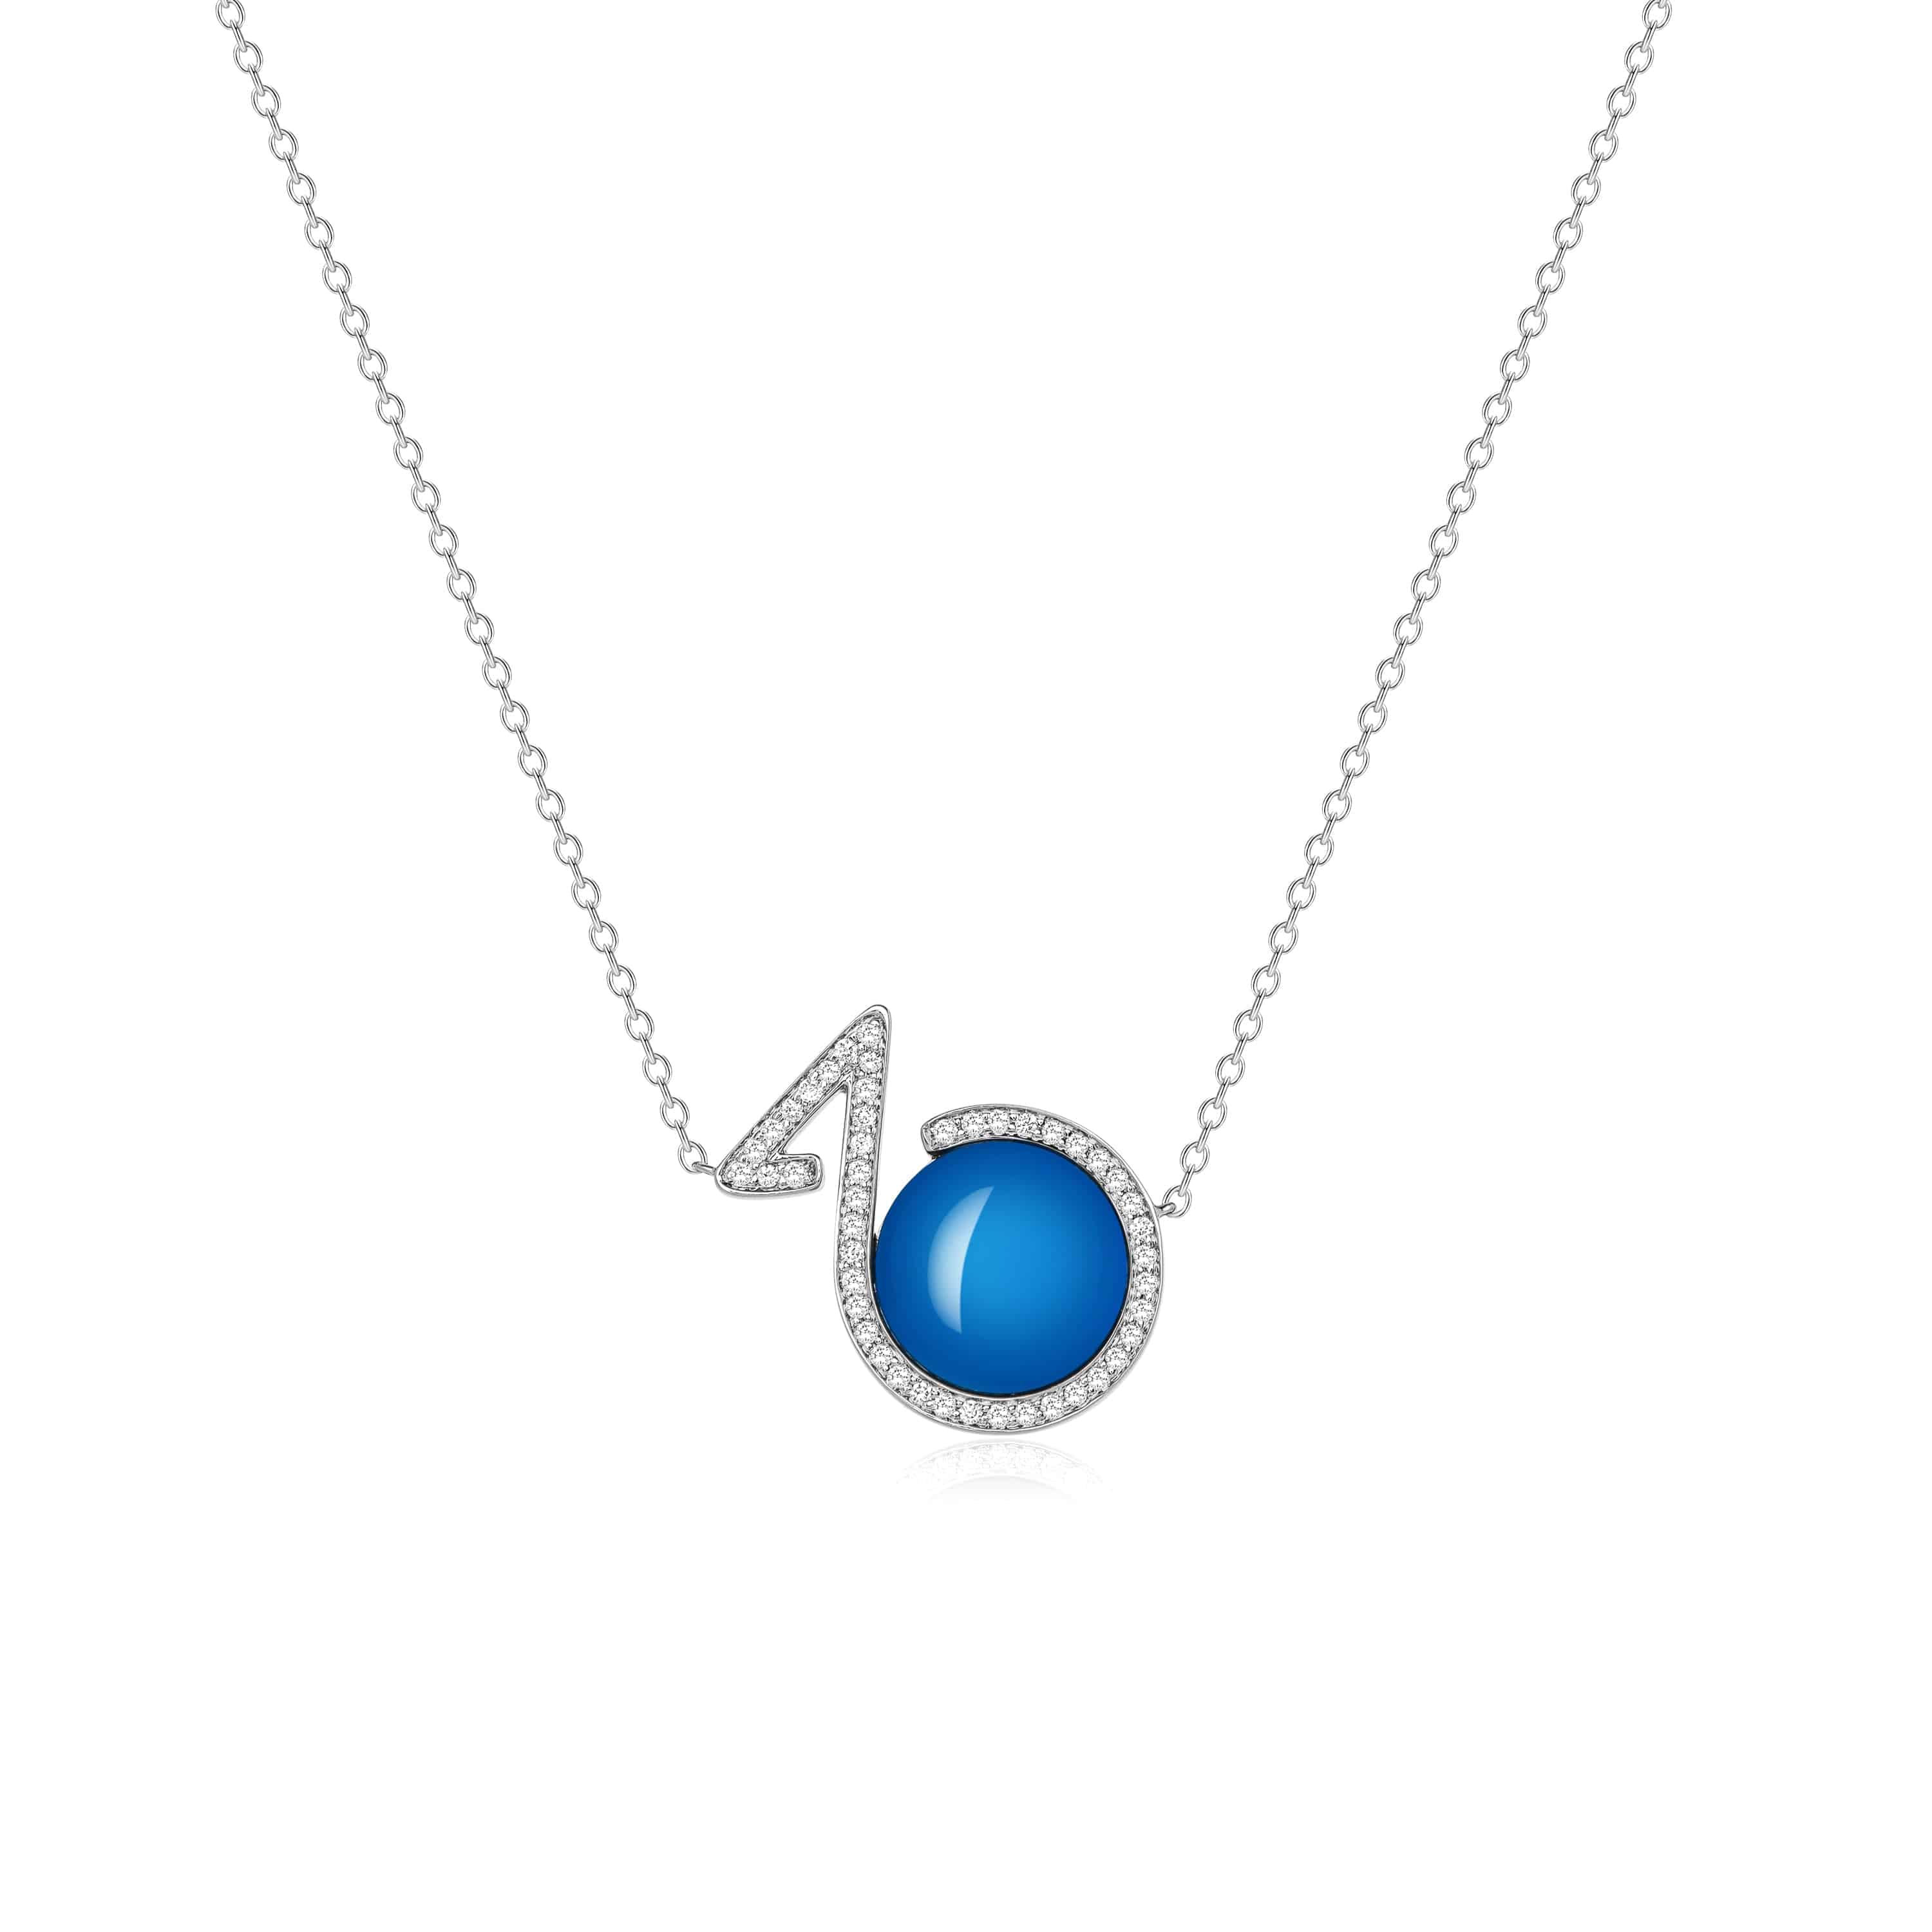 White Gold Necklace With Blue Agate And Diamonds